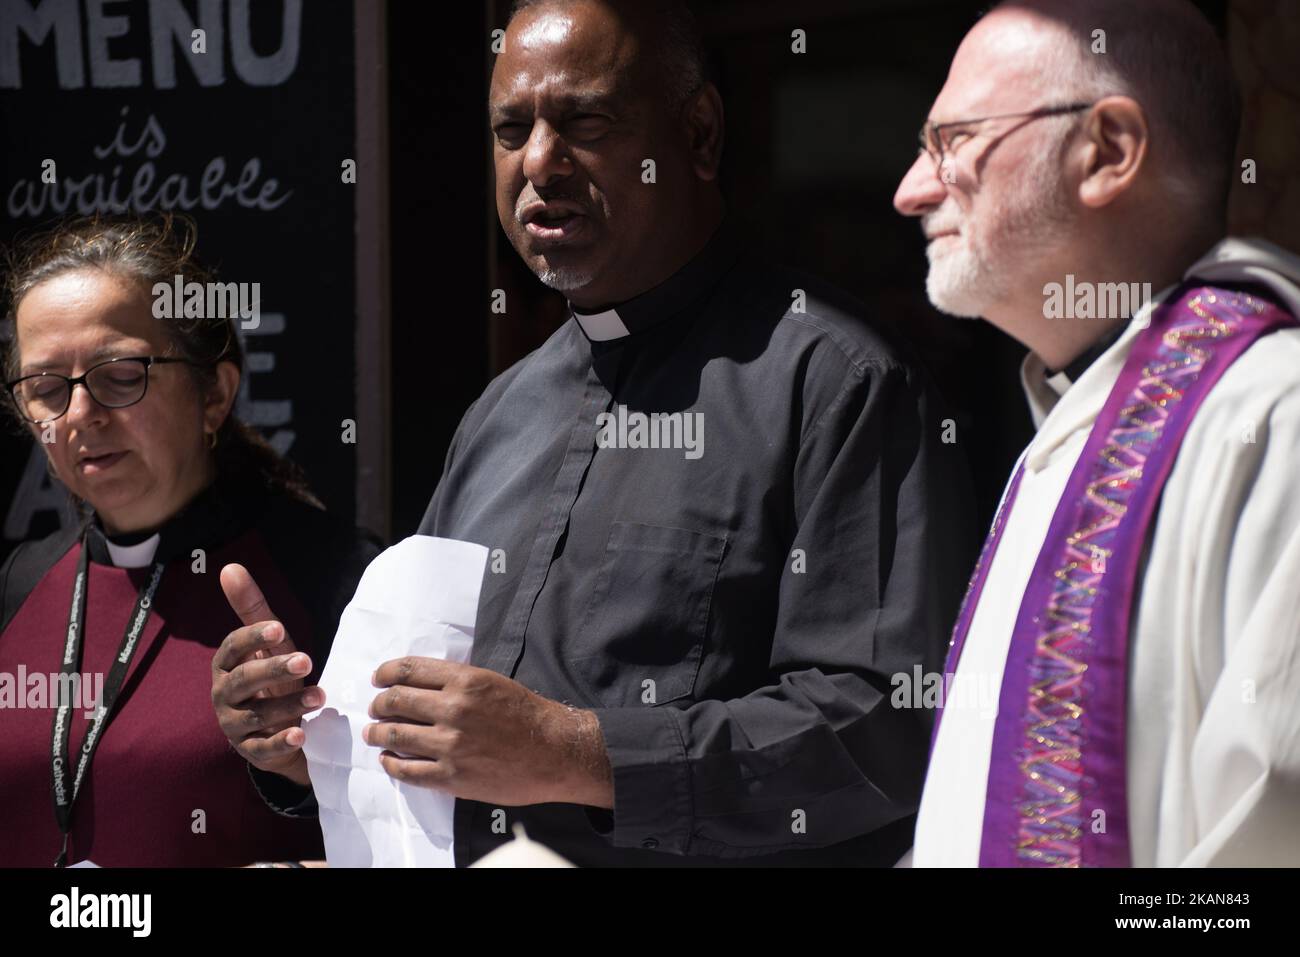 Rev. Canon Marcia Wall (L), Rogers Govender (C), Dean of Manchester, and Rev. Canon David Holgate (R), initiate a set of inter-faith prayers for the victims of the Manchester Arena explosion in Manchester, United Kingdom on Tuesday, May 23rd, 2017. Greater Manchester Police are treating the explosion after the Ariana Grande concert, which took place on 05/22/2017 at Manchester Arena, as a terrorist incident. (Photo by Jonathan Nicholson/NurPhoto) *** Please Use Credit from Credit Field *** Stock Photo